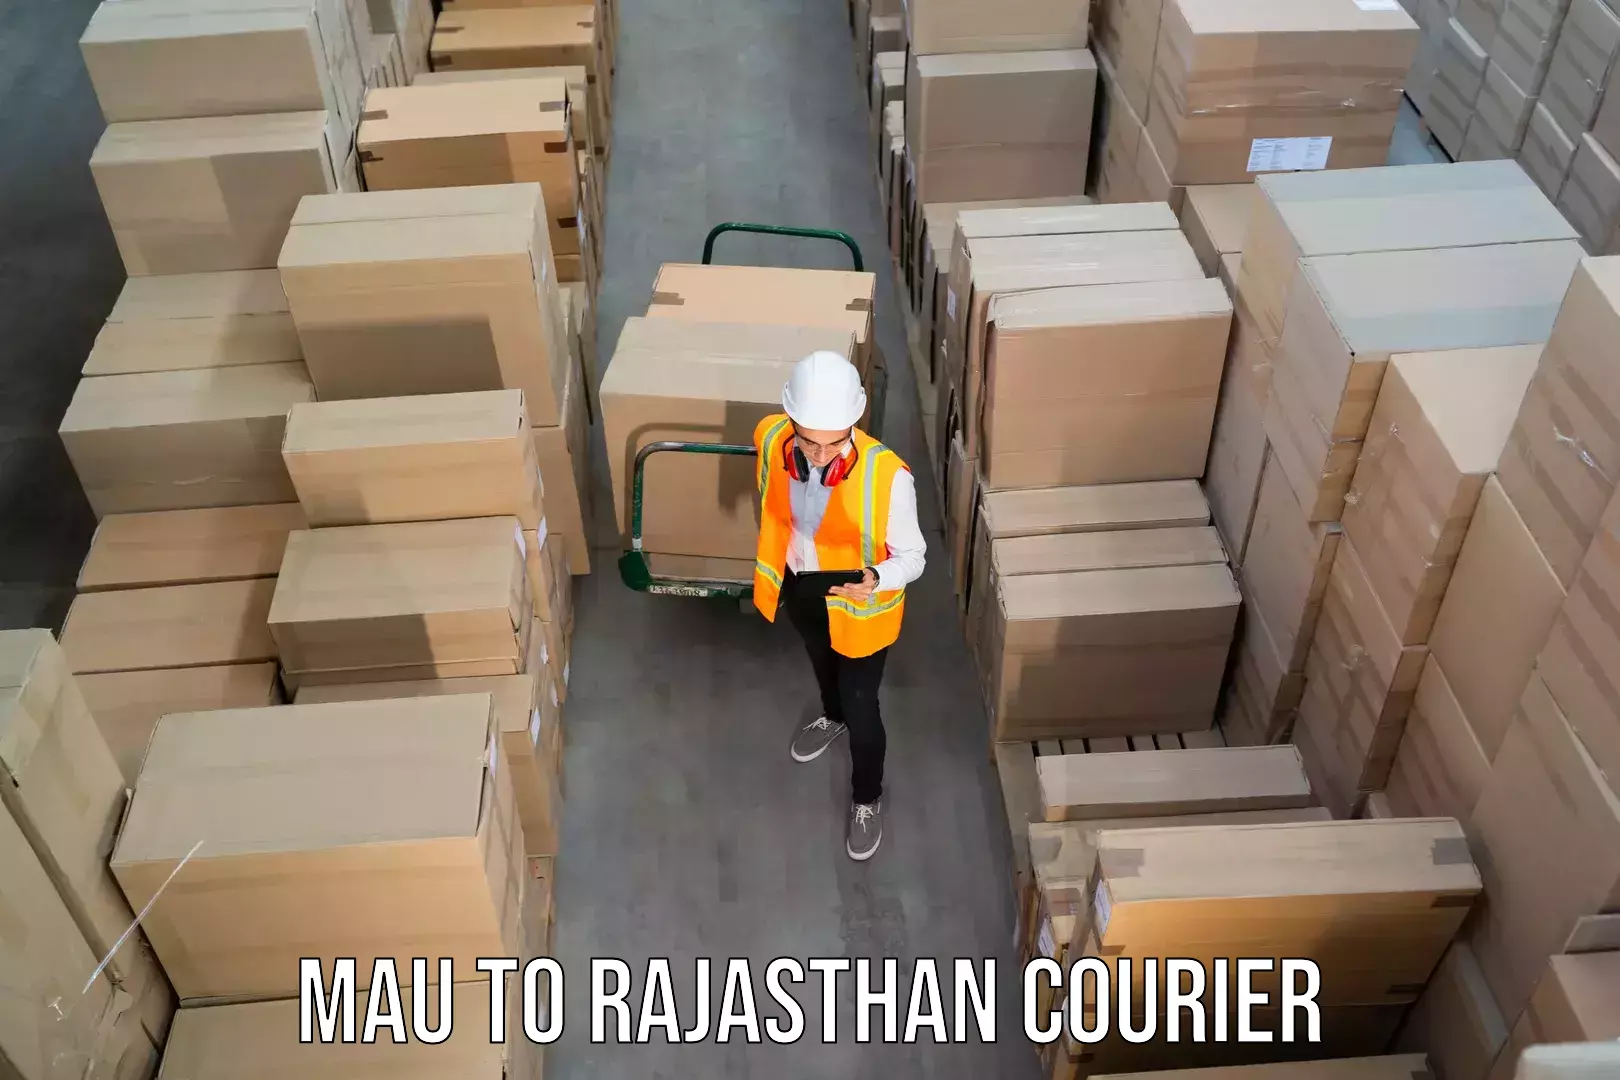 Reliable courier services Mau to Udaipurwati